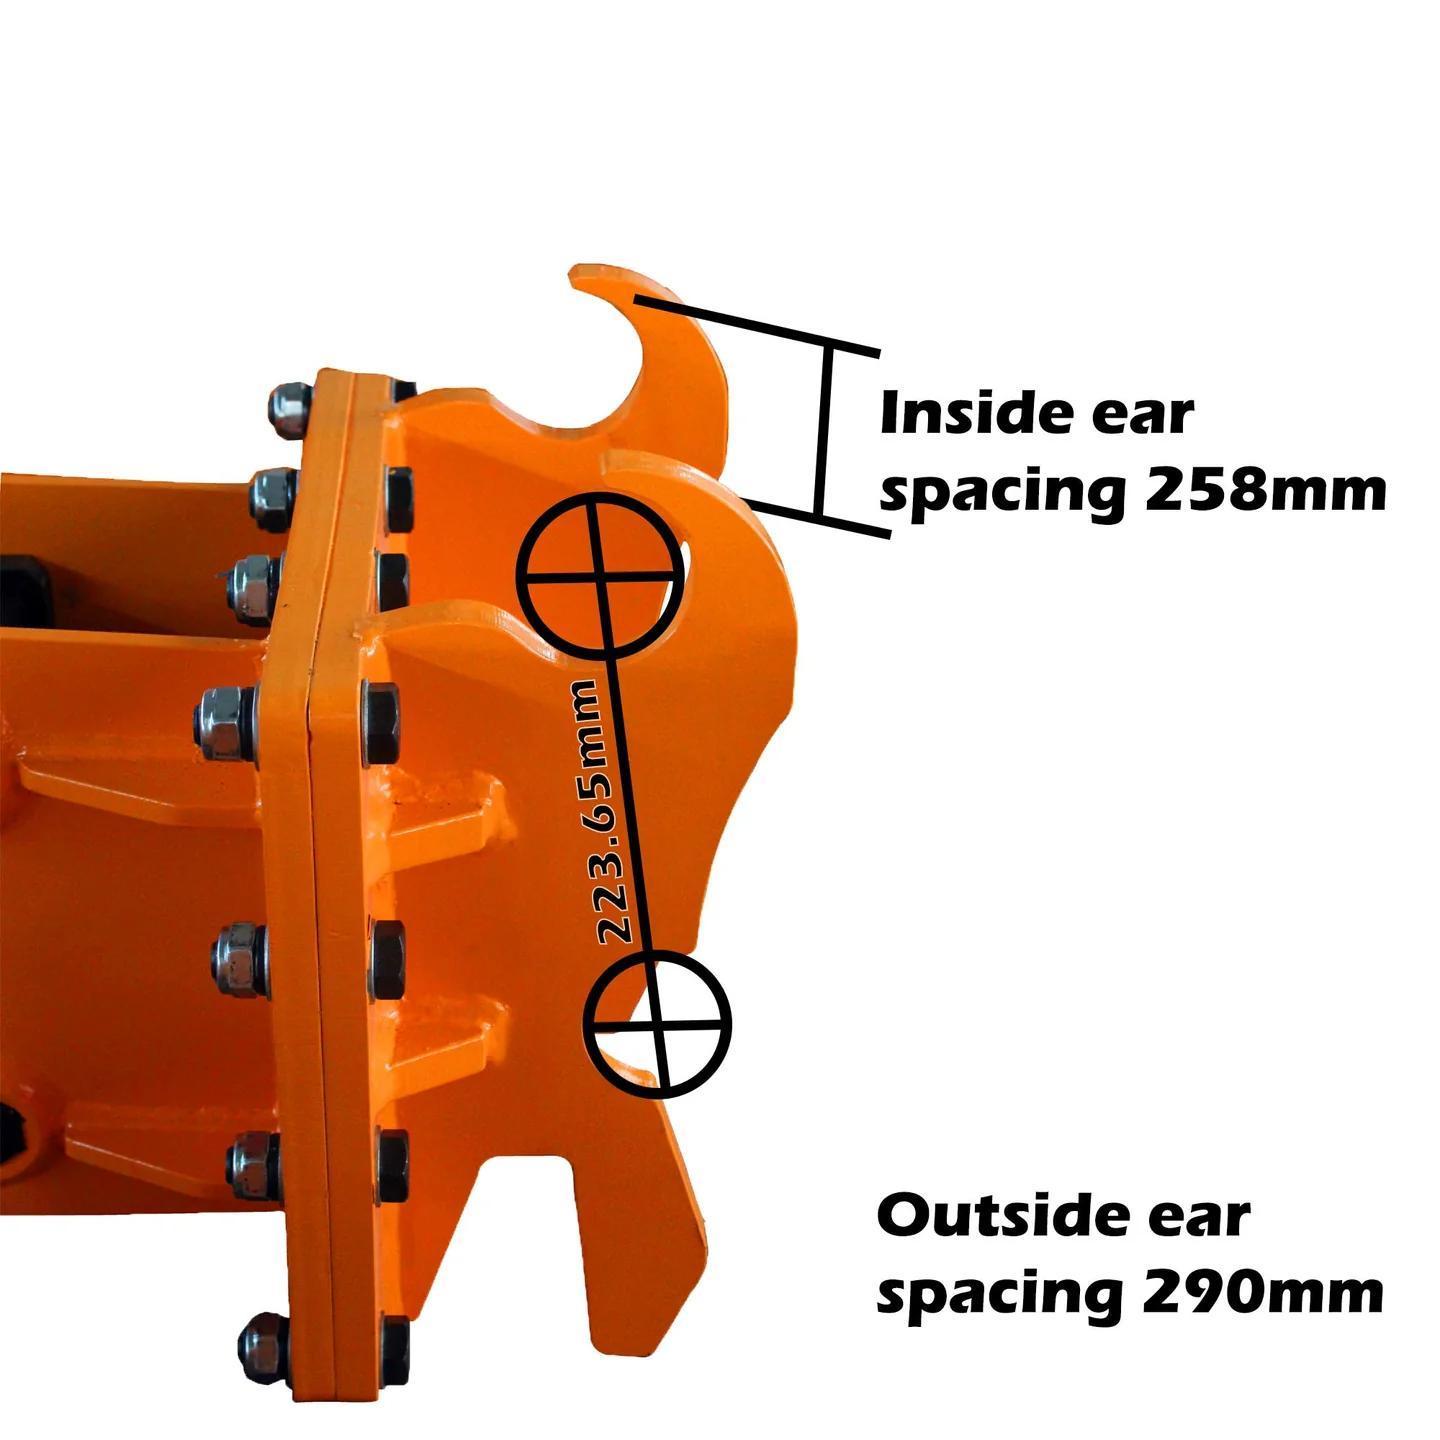 TRACTOR LOADER BACKHOE ATTACHMENT NEW TMG Industrial 4-7 Ton Excavator/Backhoe Hydraulic Hammer